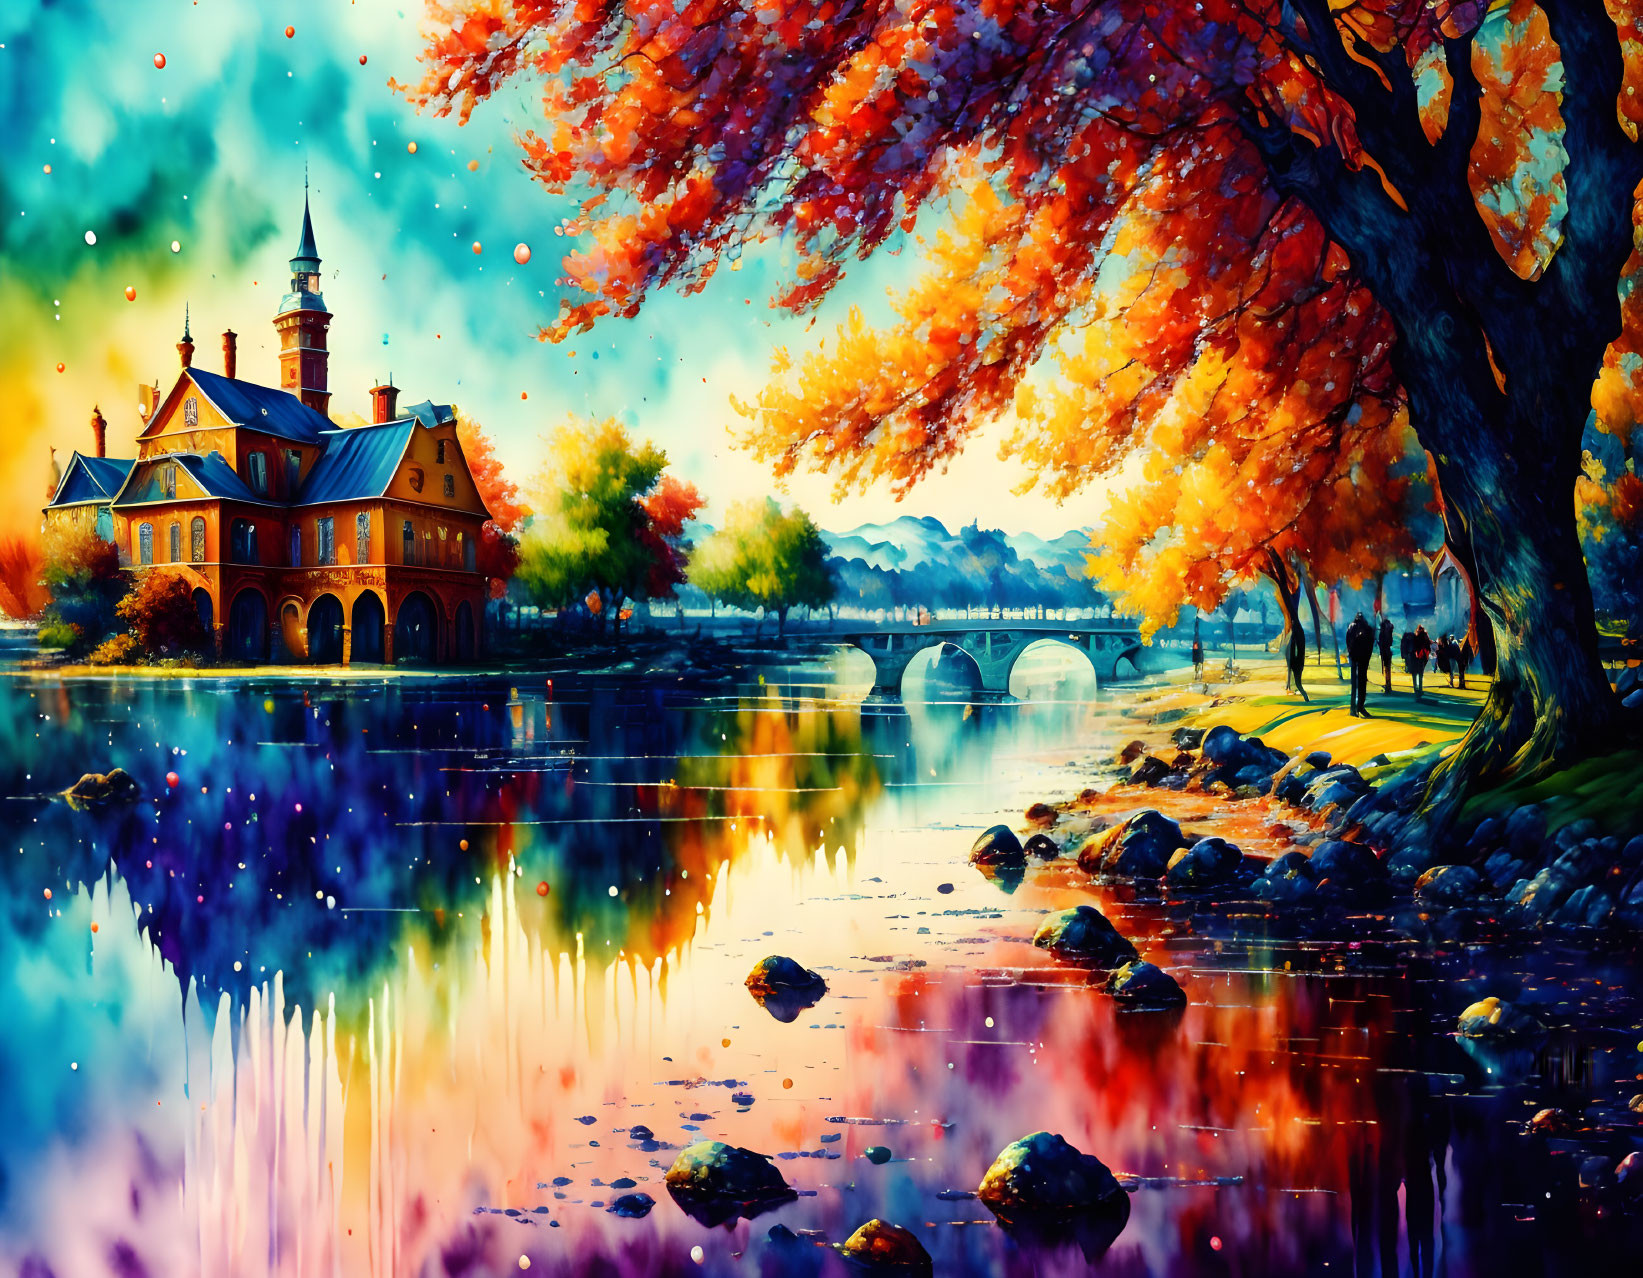 Colorful Victorian house by lake in autumn landscape with stone bridge.